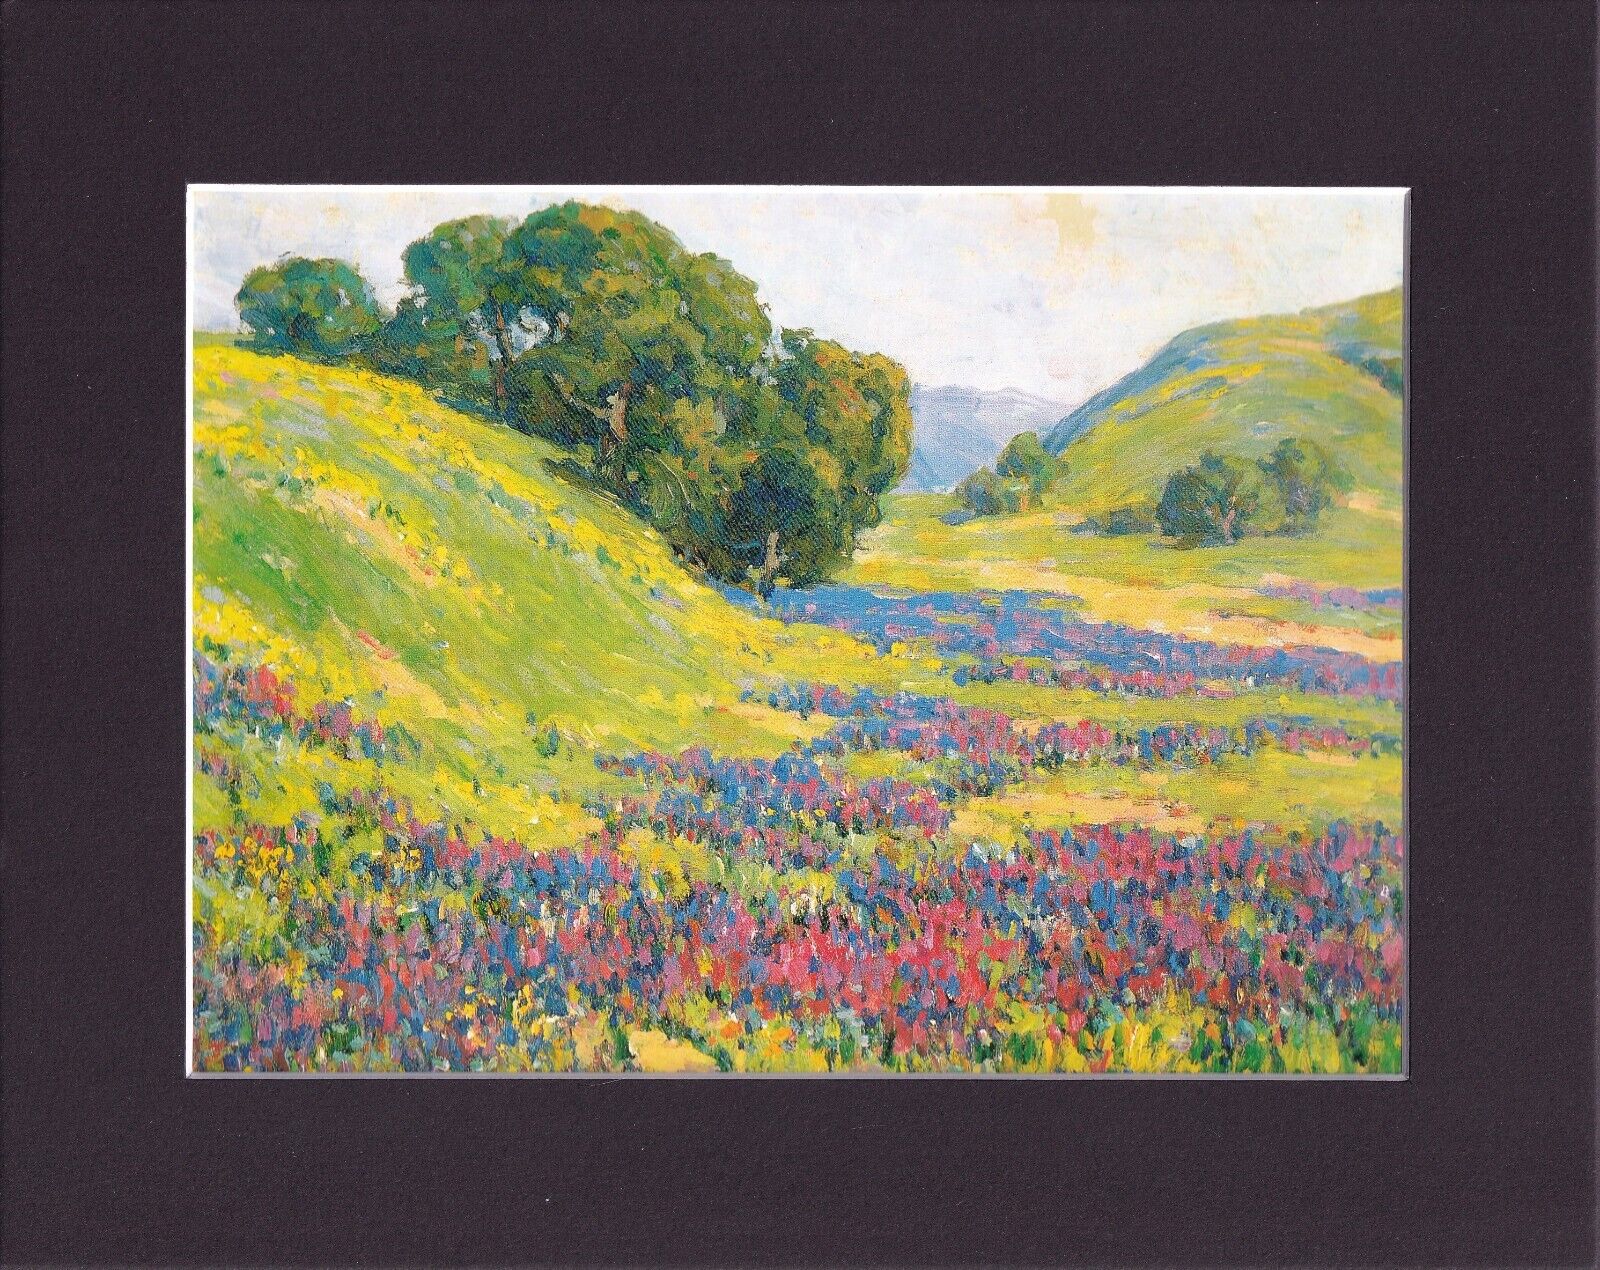 8X10 Matted Print Art Painting Picture: Benjamin Brown, Valley of Lupine